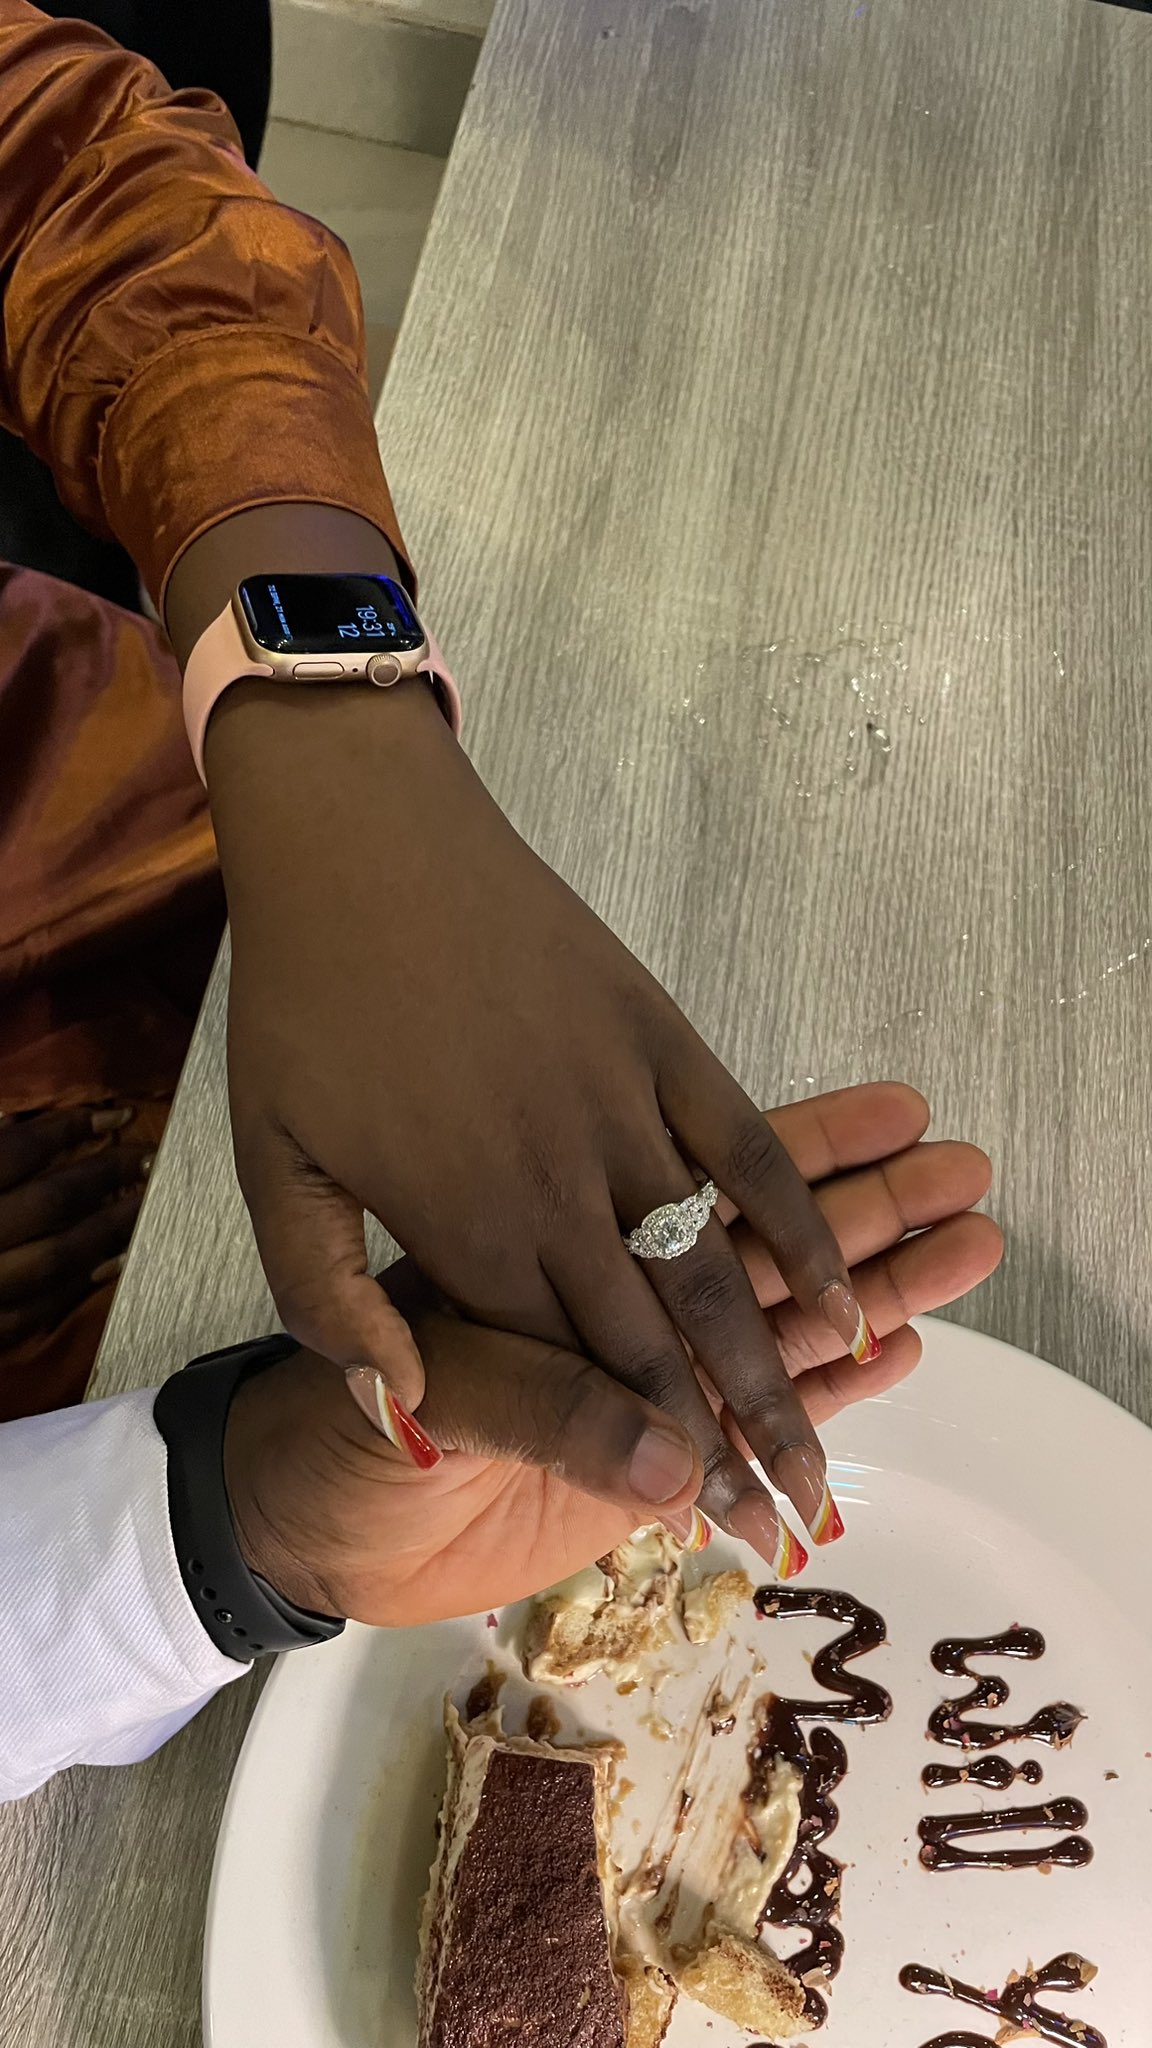 Nigerian lady gets engaged to her man months after she revealed that "he does not panic when she checks his phone and freely told her his passwords"